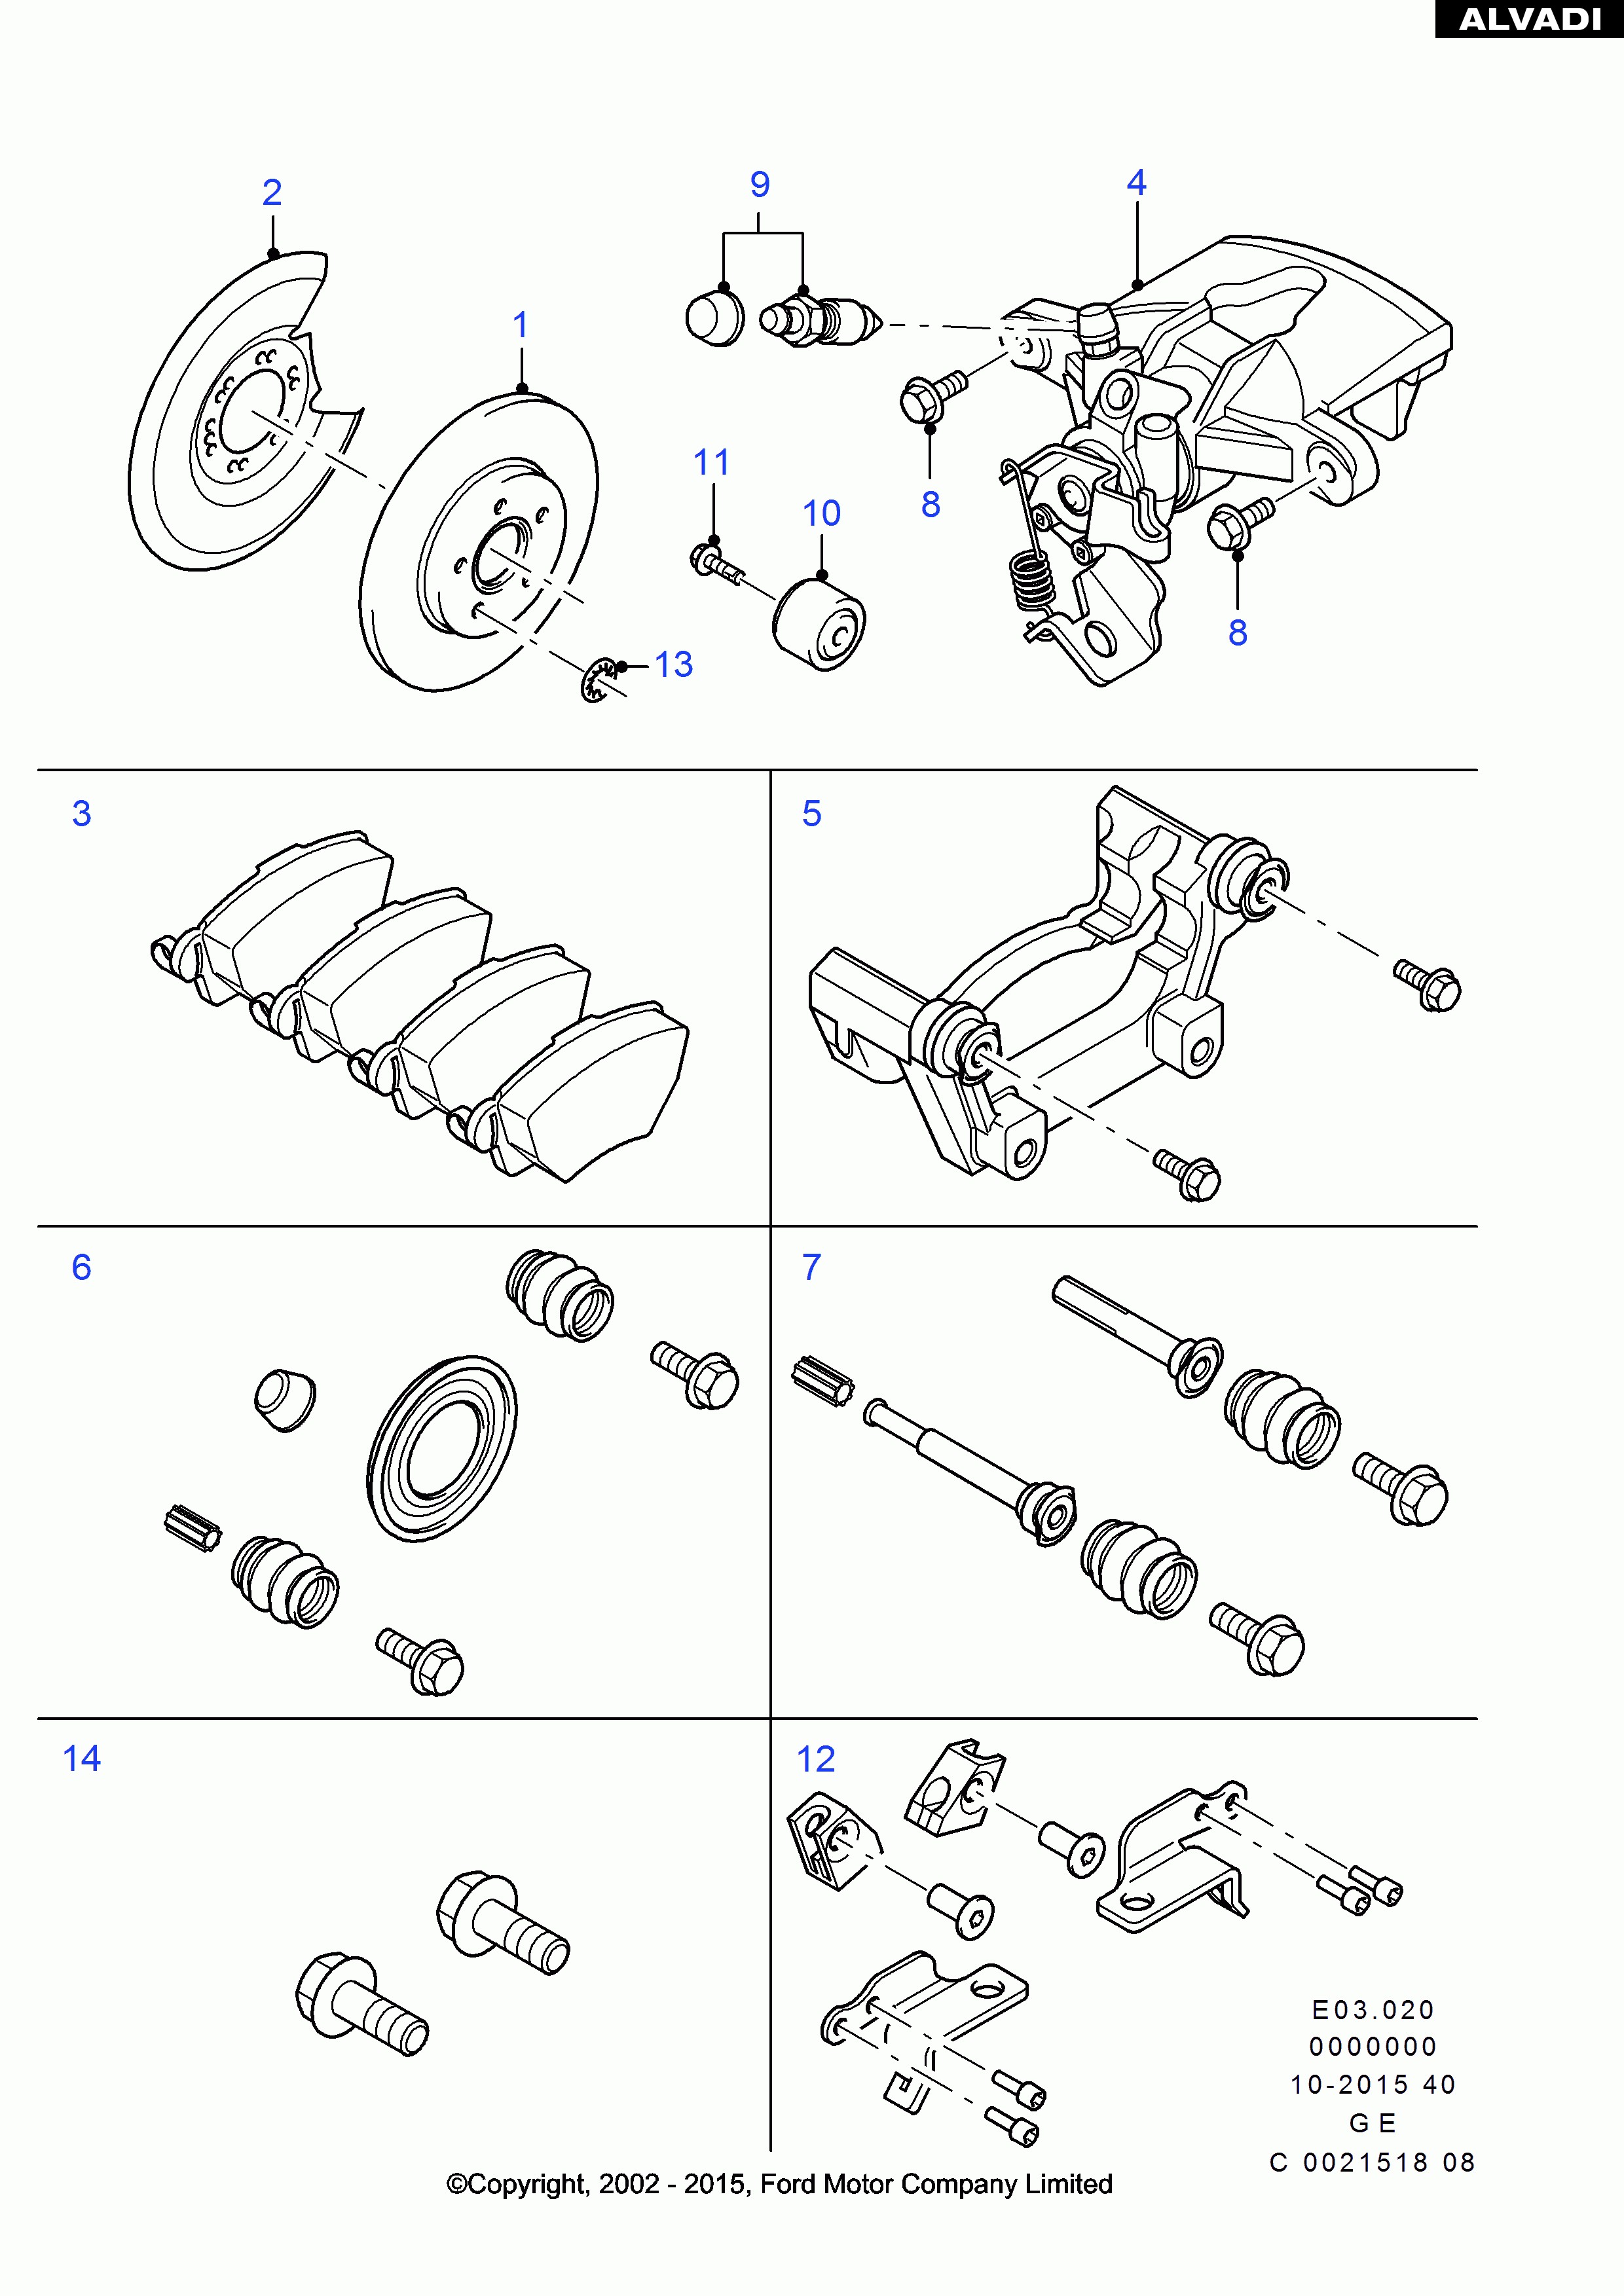 Car Brake assembly Diagram ford Rear Brake Discs and Calipers